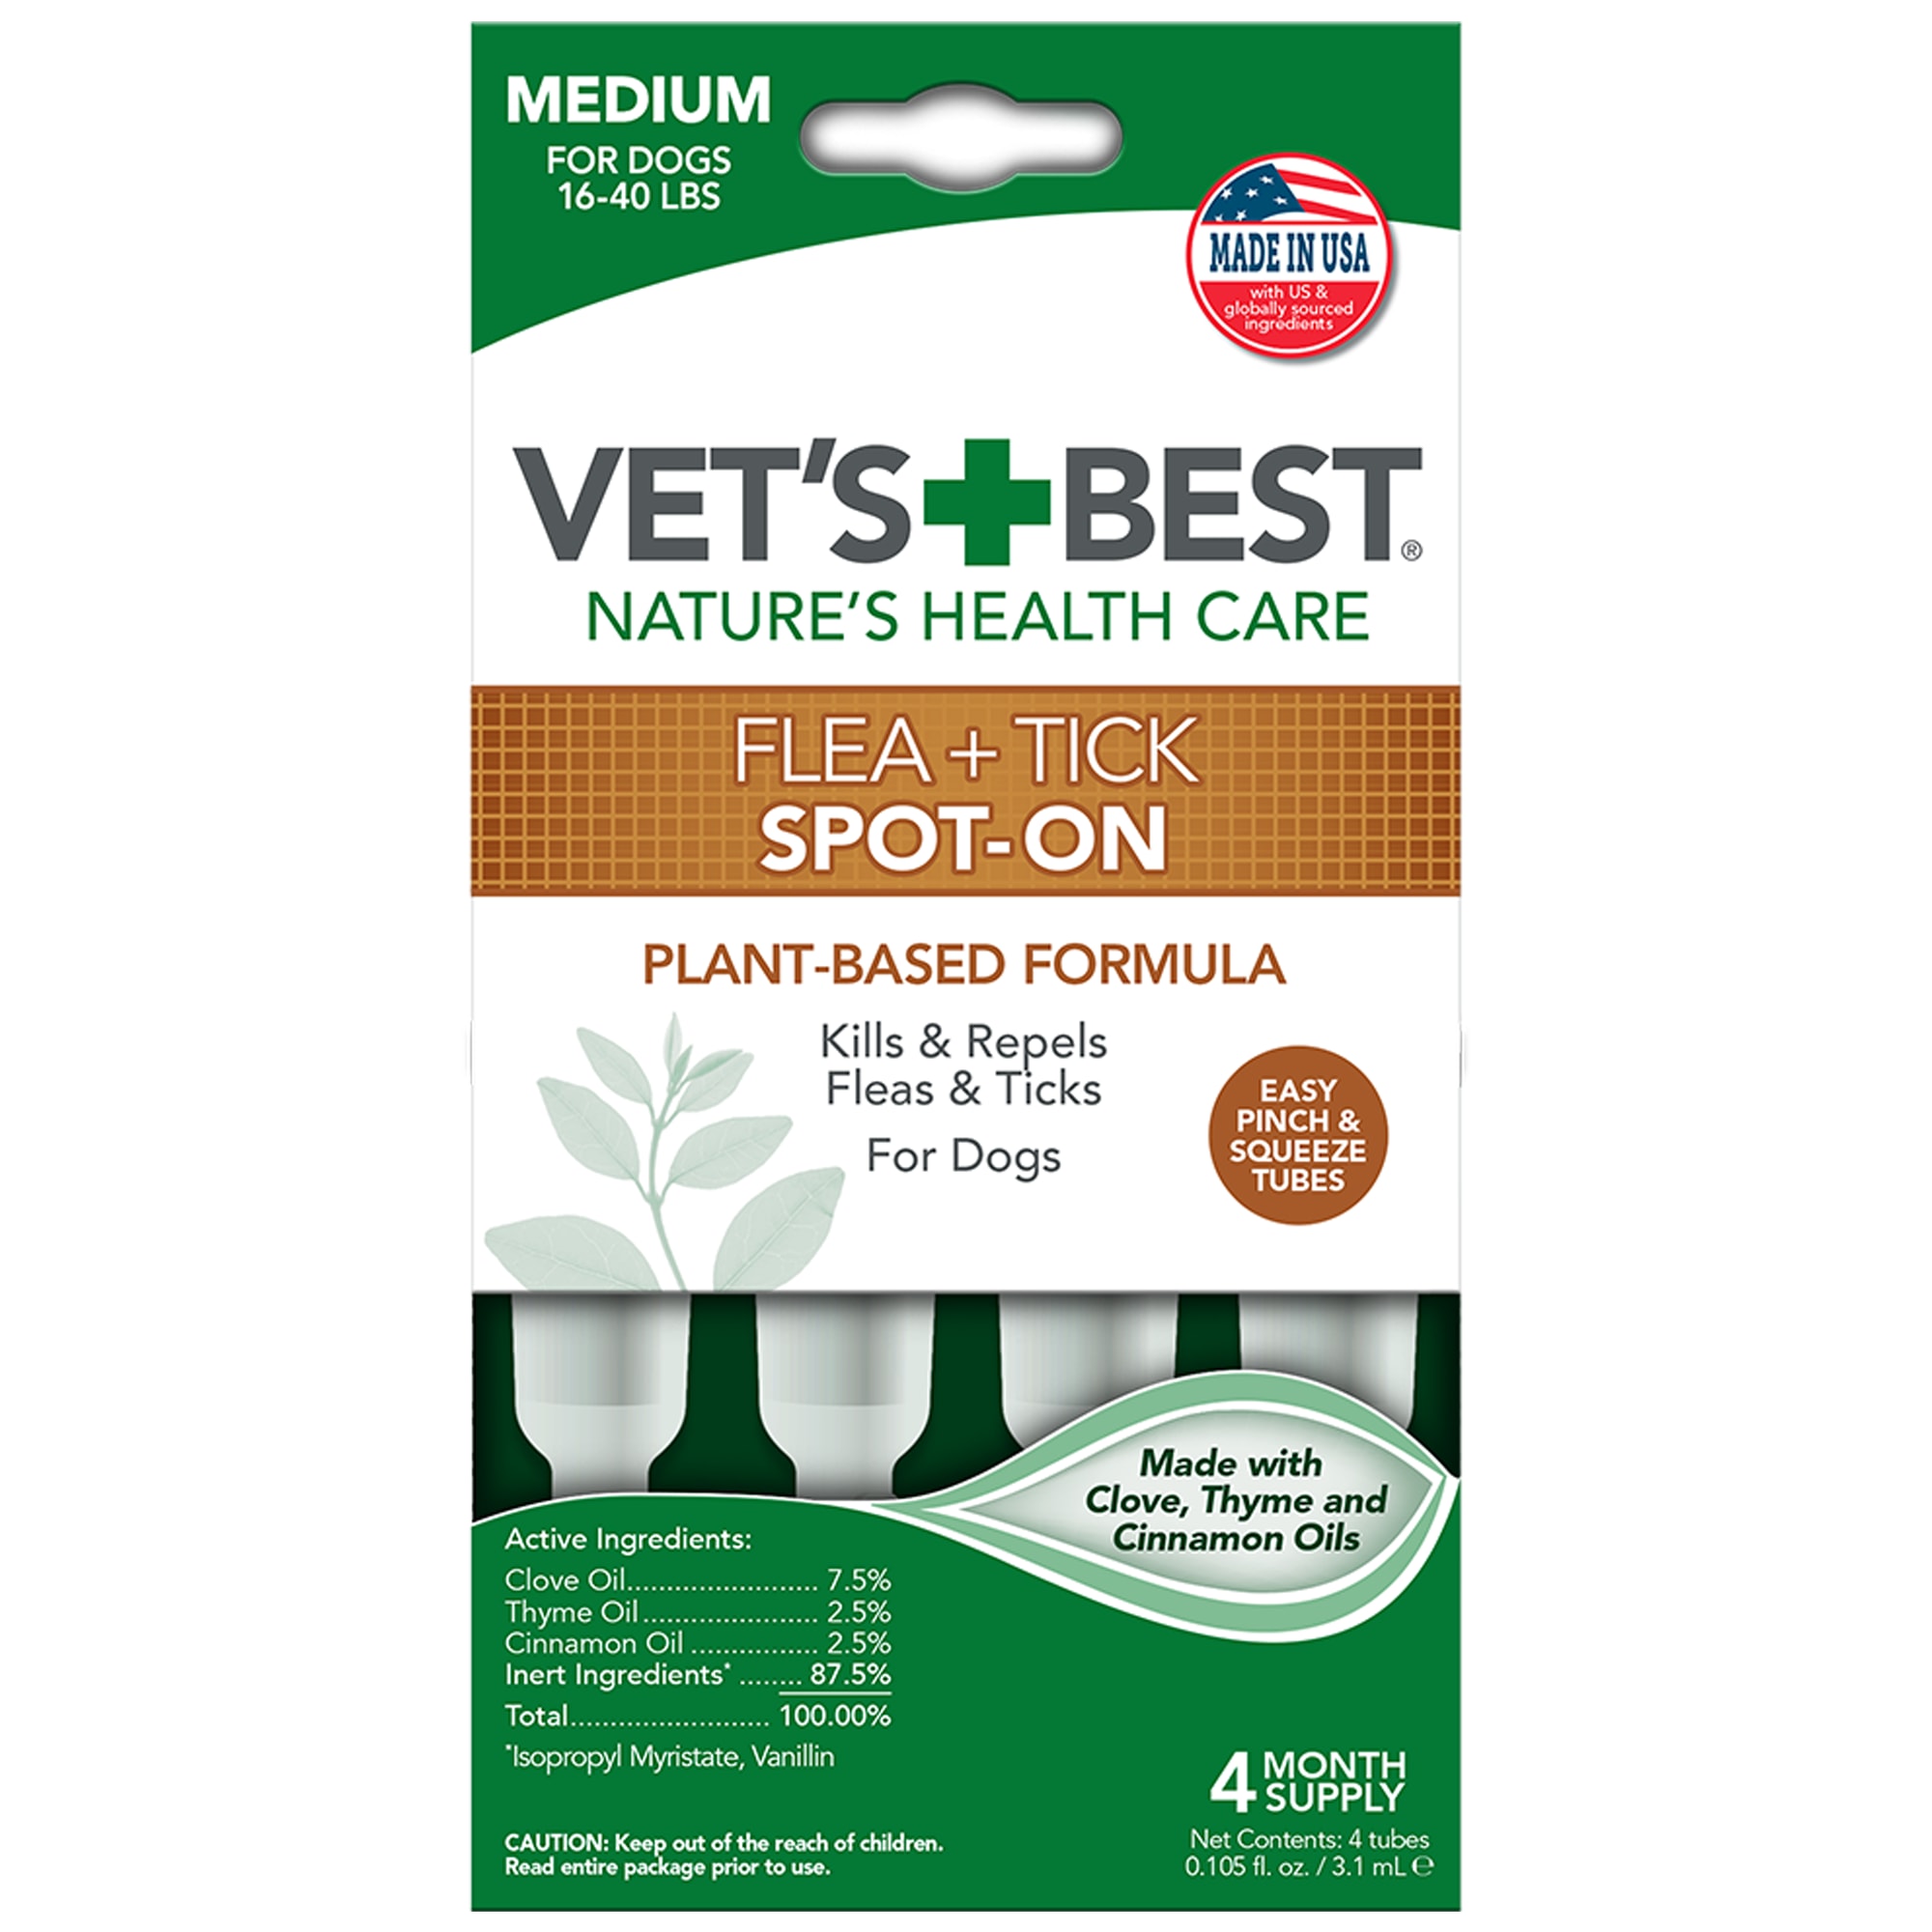 Vet's Best Topical Flea & Tick Treatment for Dogs 1640lbs